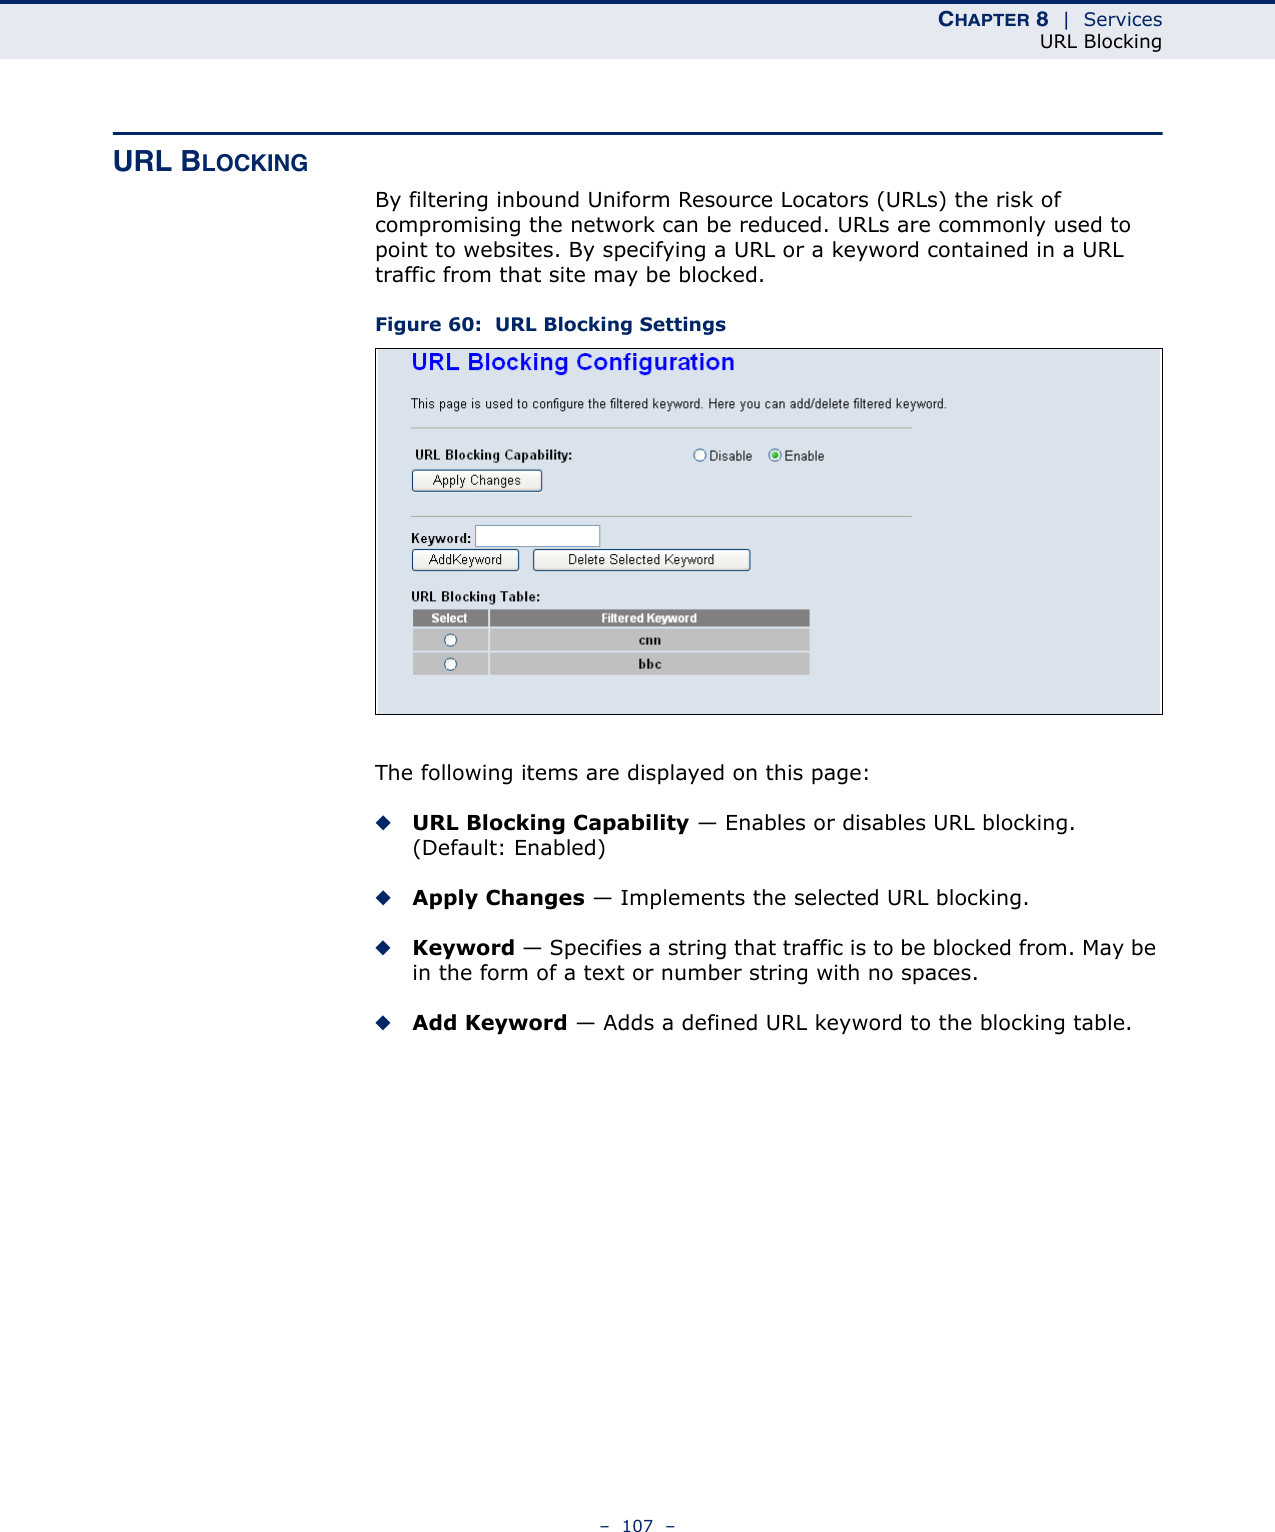 CHAPTER 8  |  ServicesURL Blocking–  107  –URL BLOCKINGBy filtering inbound Uniform Resource Locators (URLs) the risk of compromising the network can be reduced. URLs are commonly used to point to websites. By specifying a URL or a keyword contained in a URL traffic from that site may be blocked.Figure 60:  URL Blocking SettingsThe following items are displayed on this page:◆URL Blocking Capability — Enables or disables URL blocking. (Default: Enabled)◆Apply Changes — Implements the selected URL blocking.◆Keyword — Specifies a string that traffic is to be blocked from. May be in the form of a text or number string with no spaces.◆Add Keyword — Adds a defined URL keyword to the blocking table.